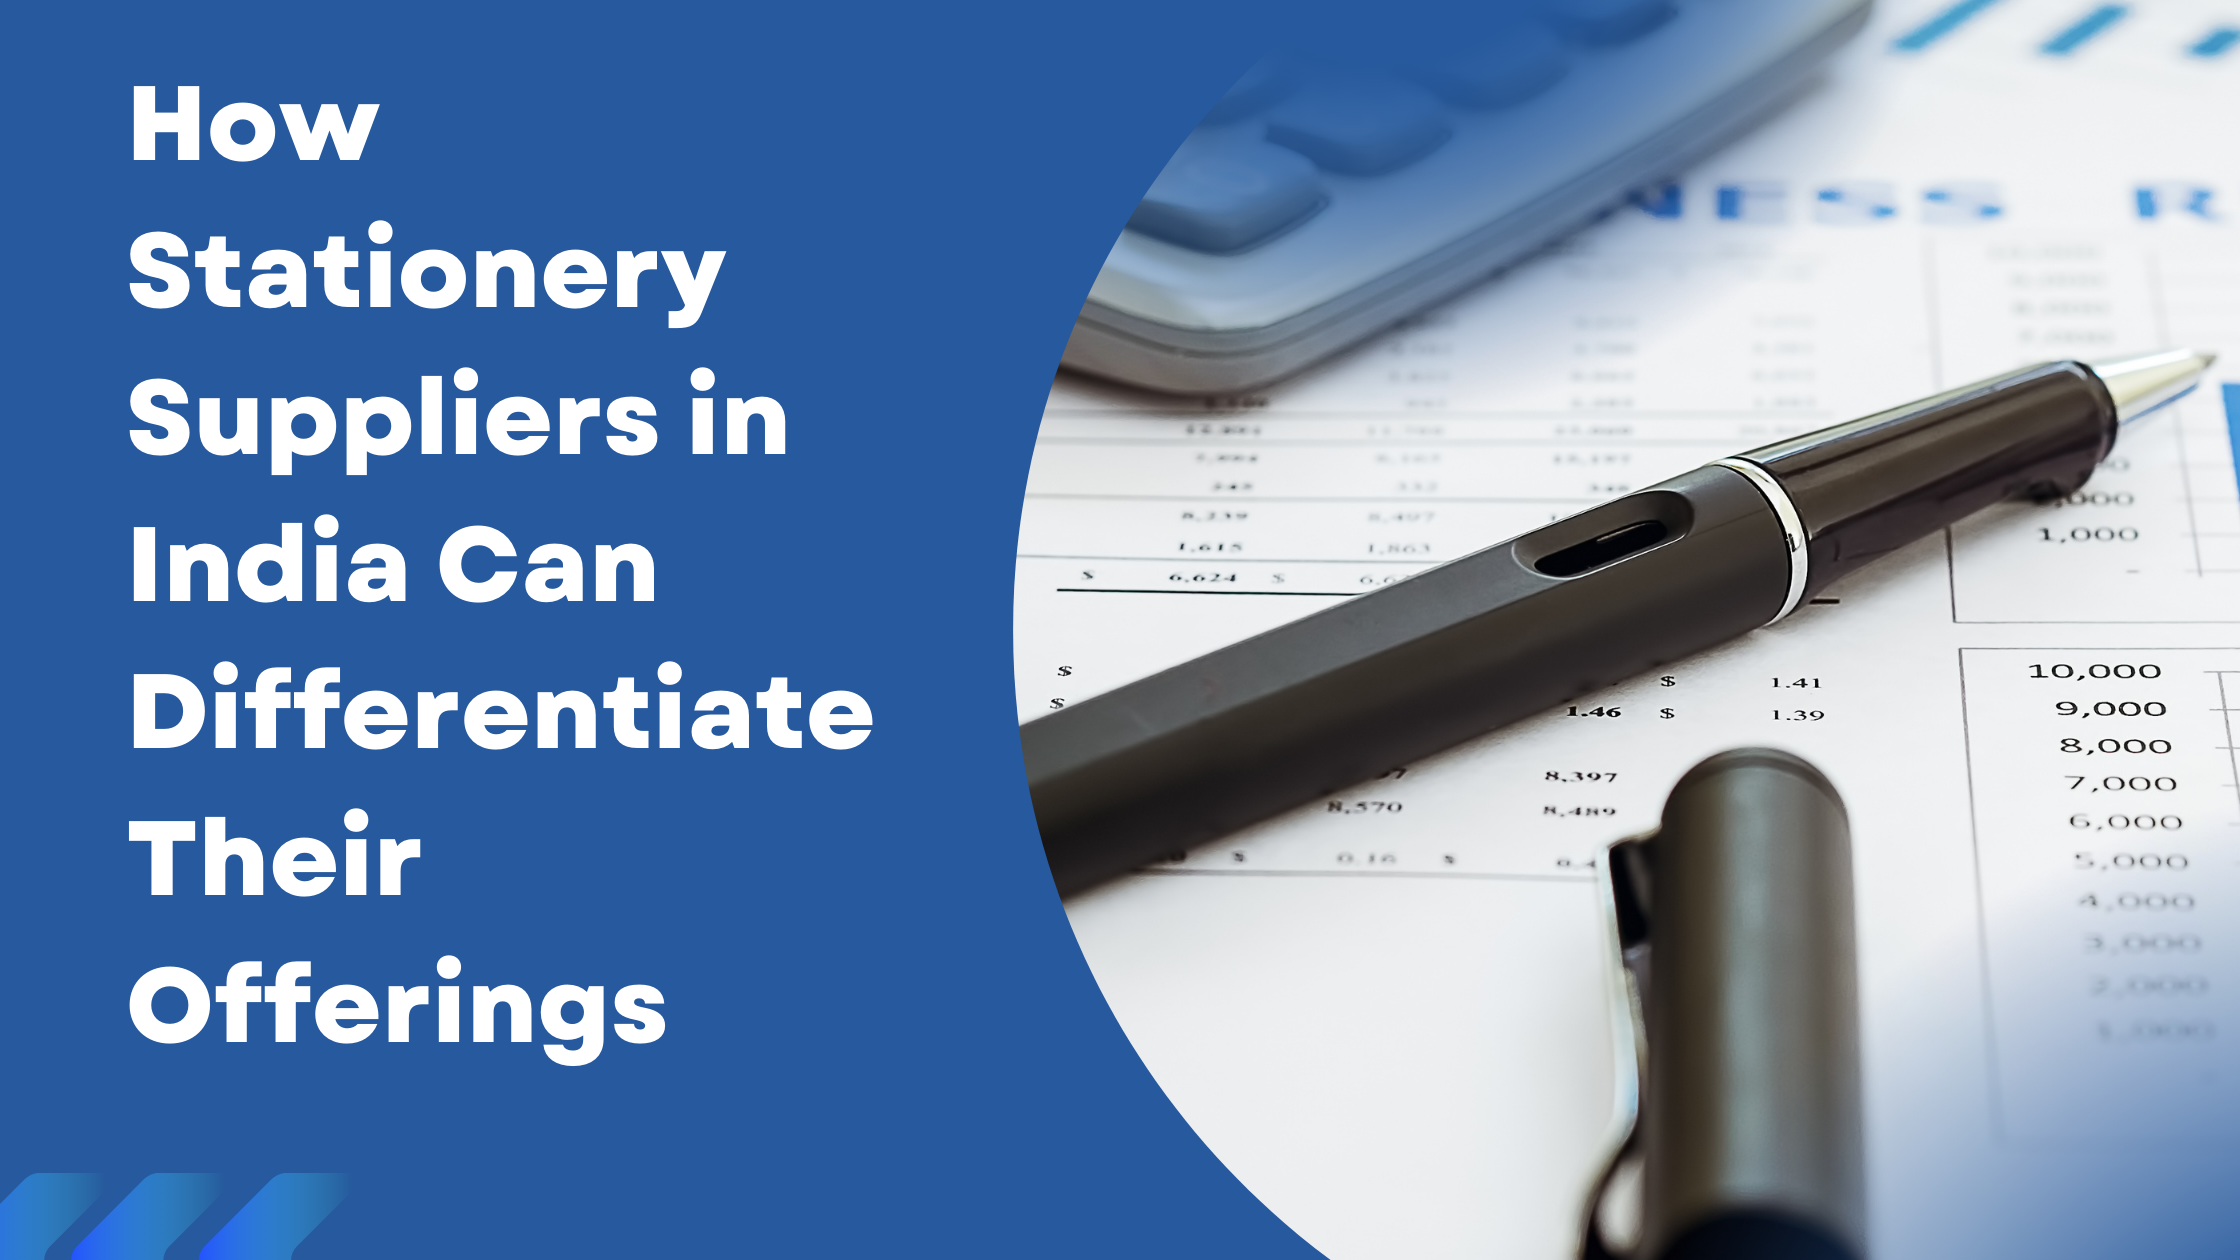 How Stationery Suppliers in India Can Differentiate Their Offerings